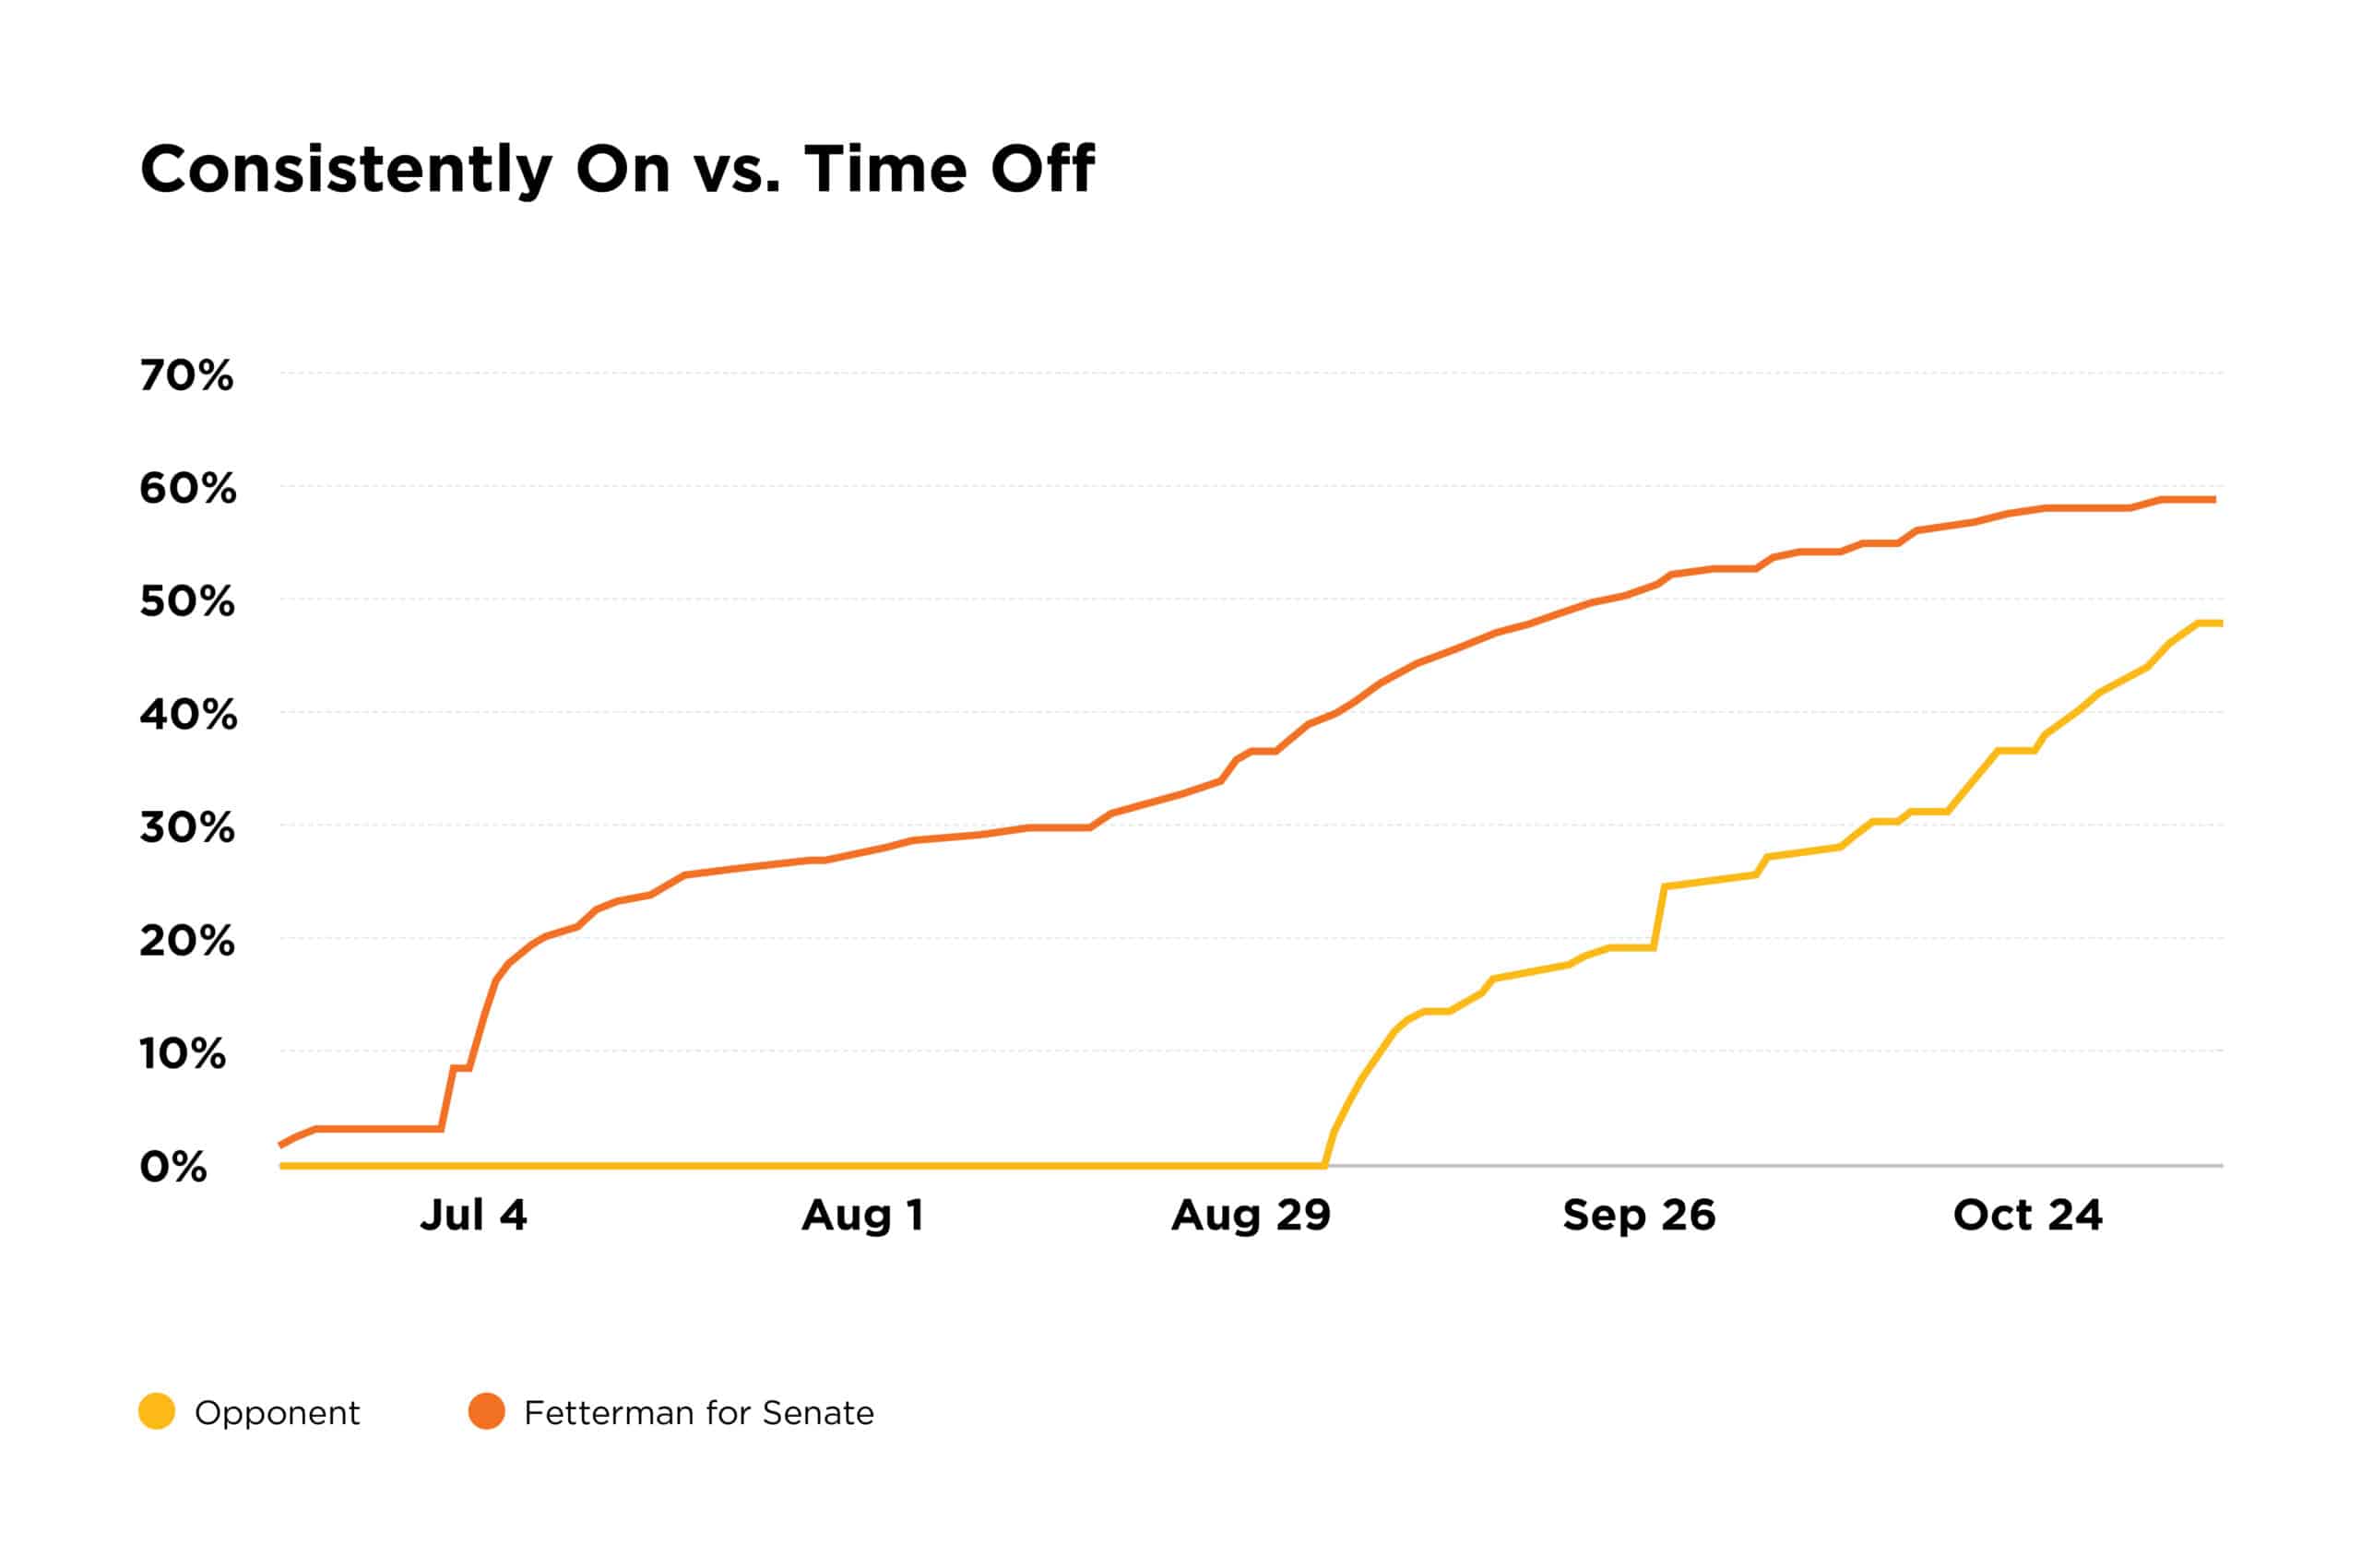 Line graph of the Fetterman for Senate campaign vs. an opponent over time consistently on vs. time off. Fetterman for Senate goes further than the opponent when consistently on.